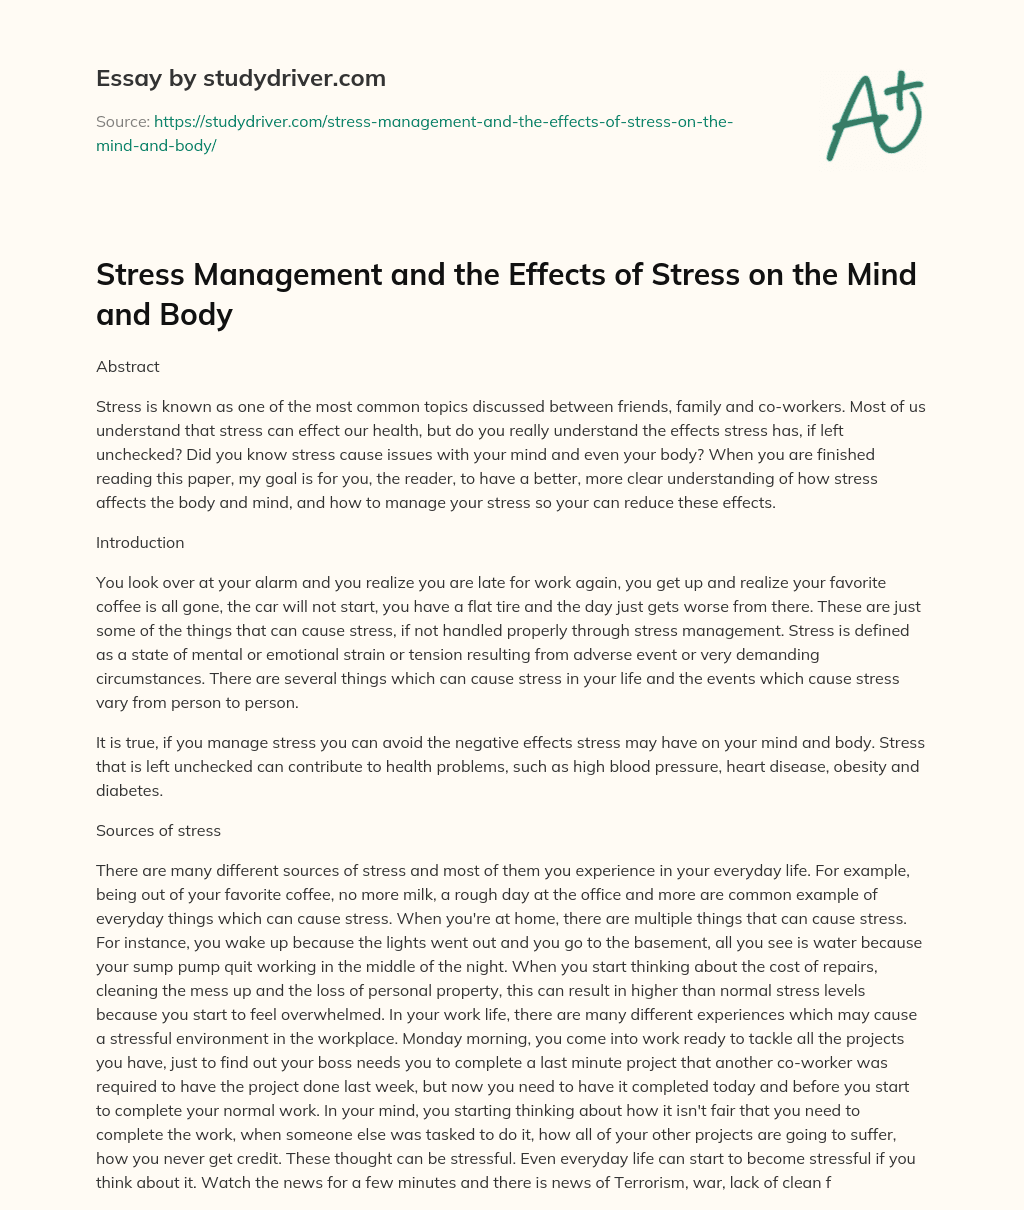 Stress Management and the Effects of Stress on the Mind and Body essay